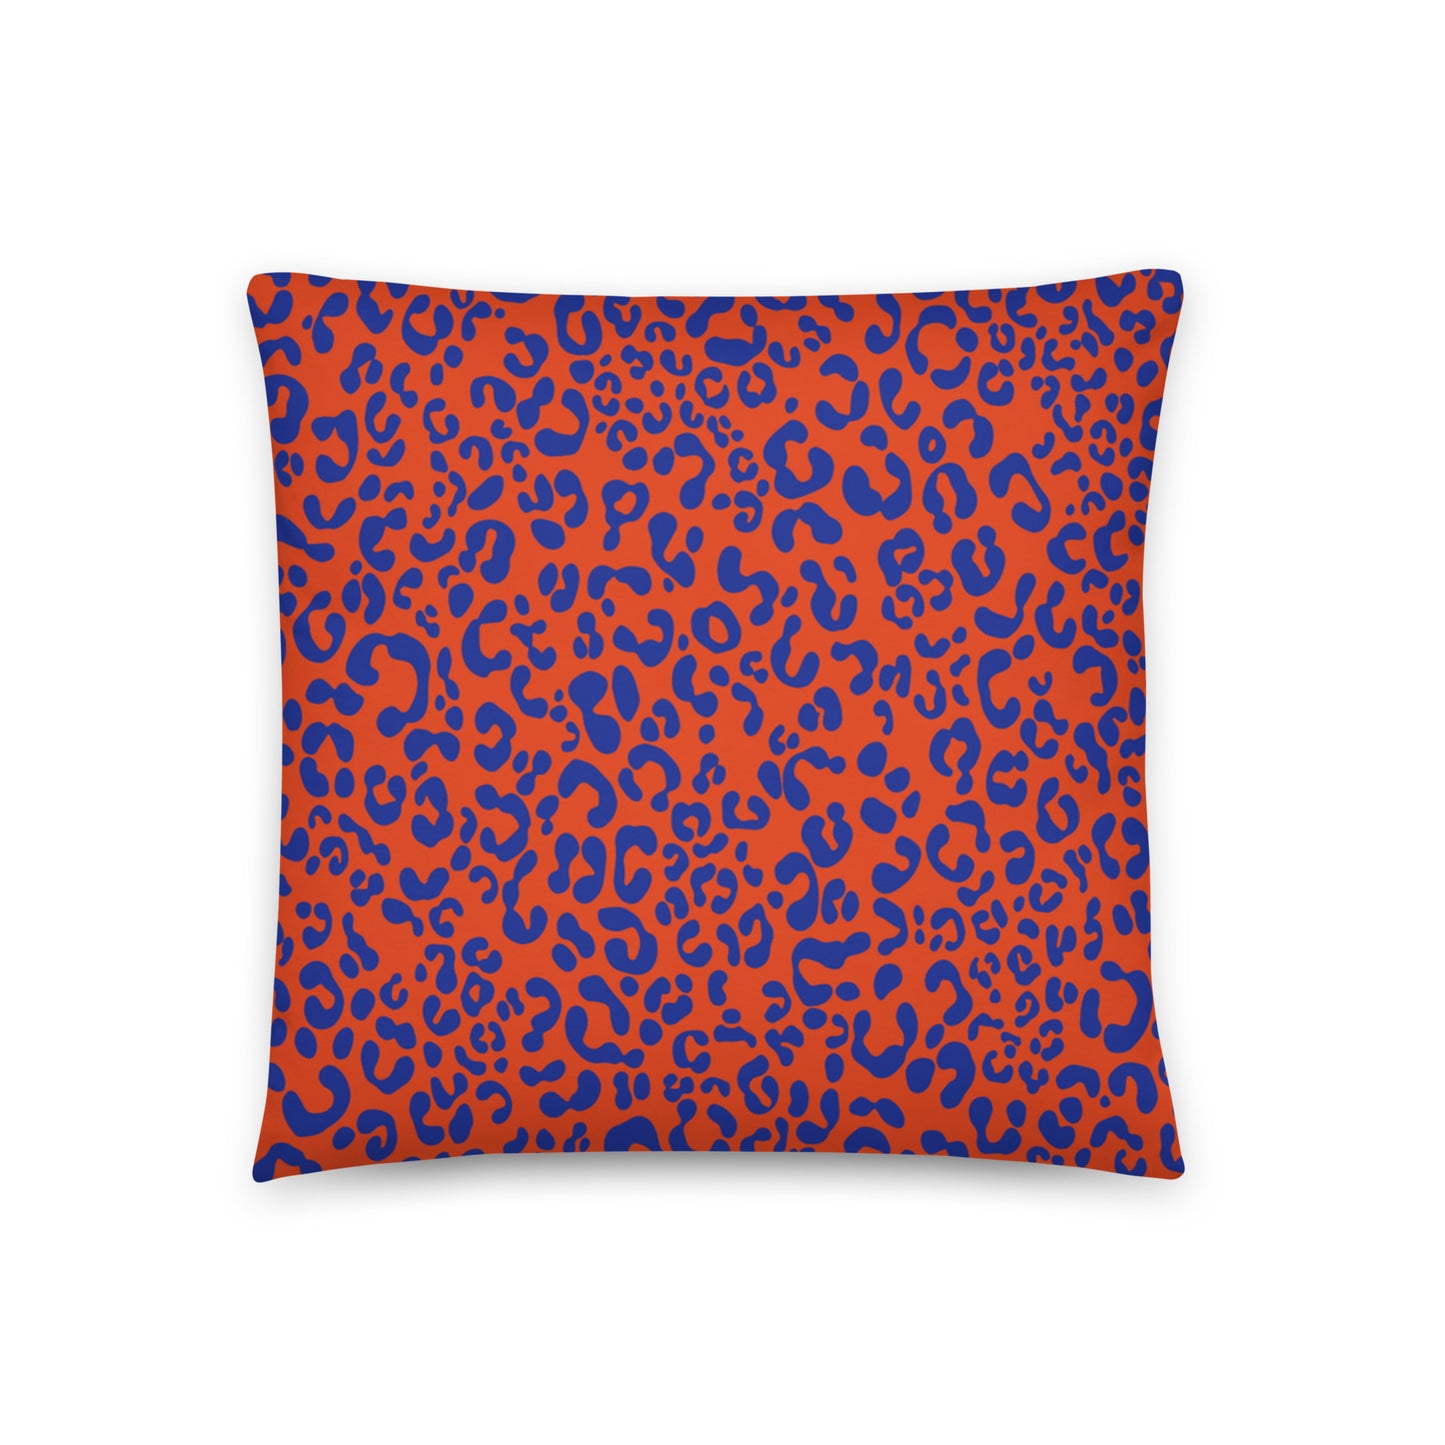  vibrant cushion cover features a striking orange backdrop to a bold blue leopard print pattern